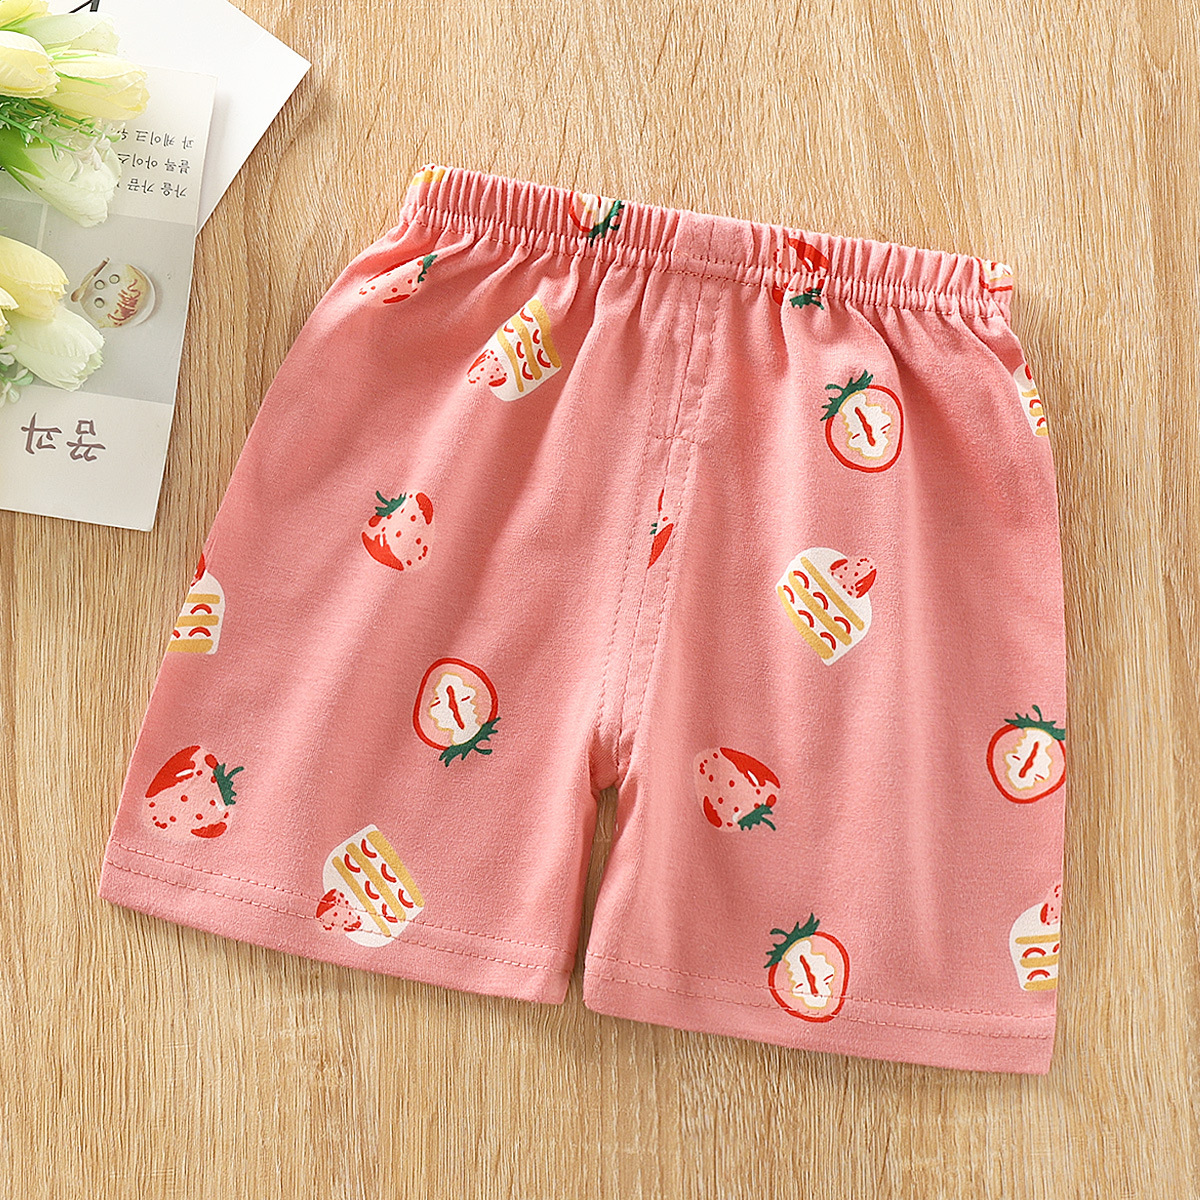 Kids Cotton Shorts Cute Cartoon Printing Summer Breathable Casual Short Pants For 0-7 Years Old Boys Girls Strawberry 3-4Y 65#100CM